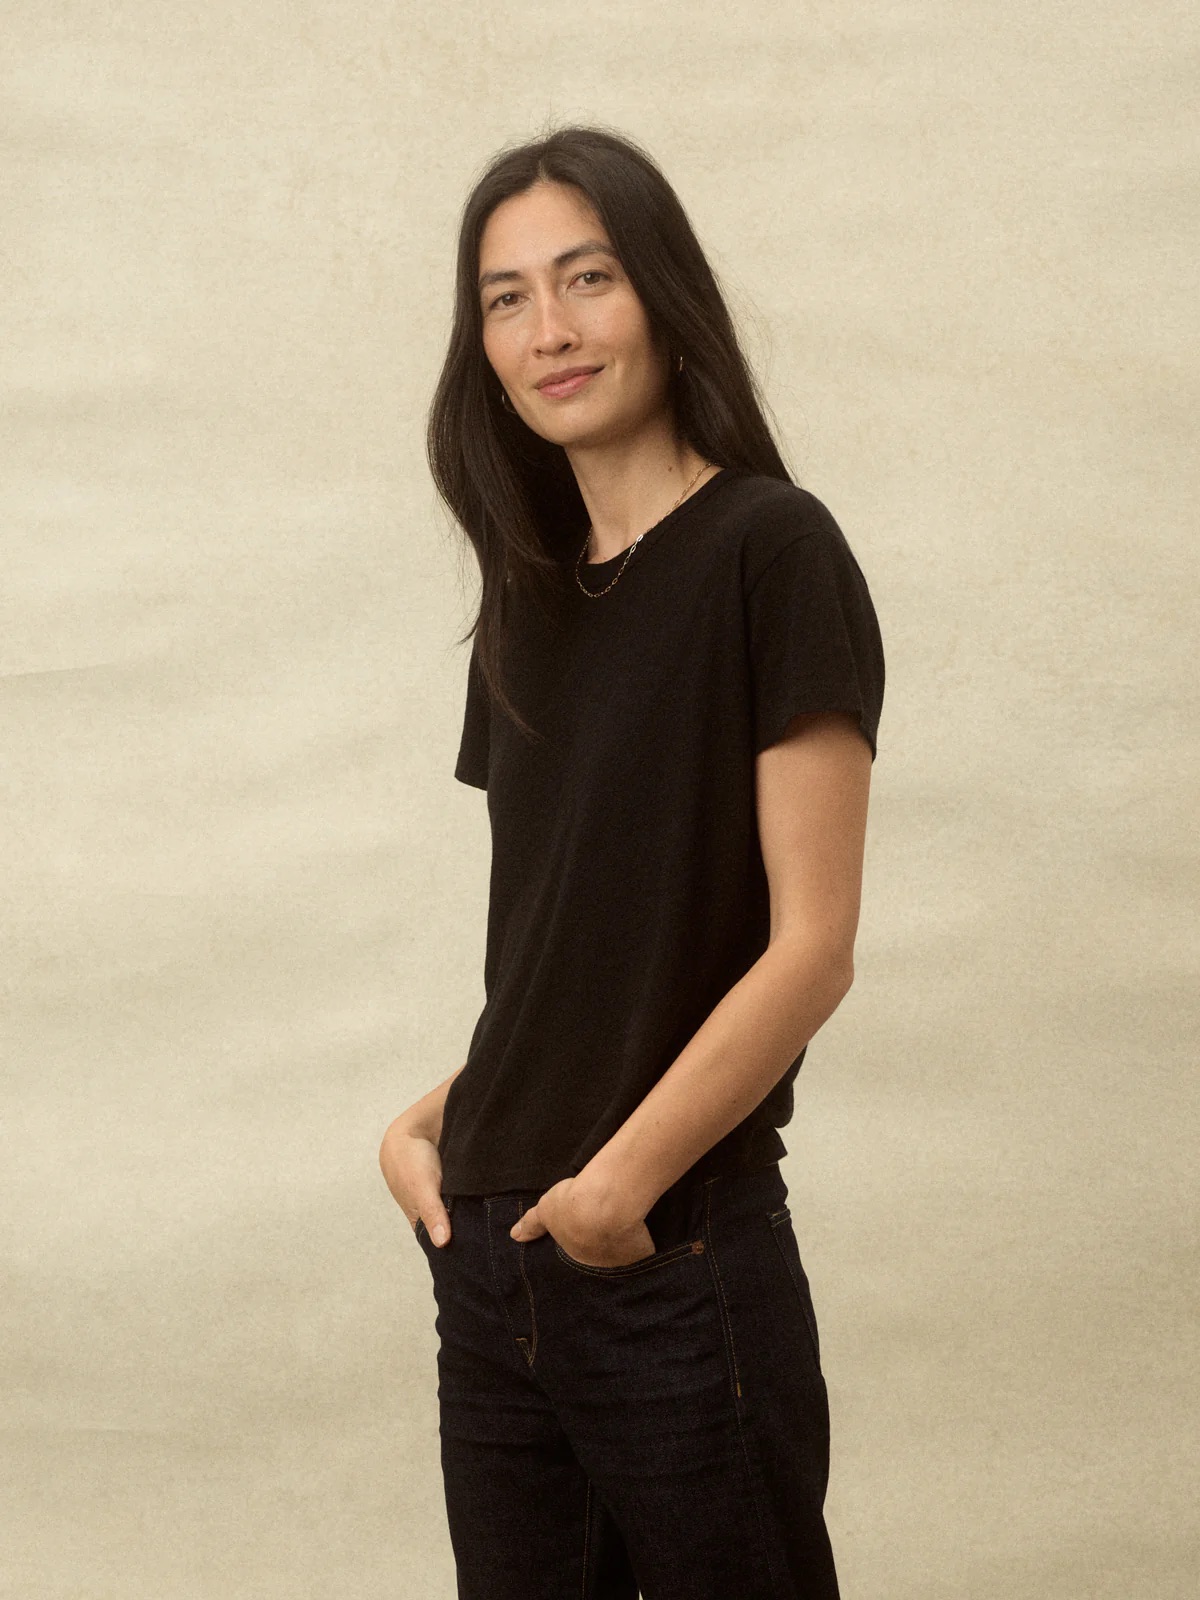 A woman in a black t-shirt and jeans stands casually with one hand in her pocket against a beige background.